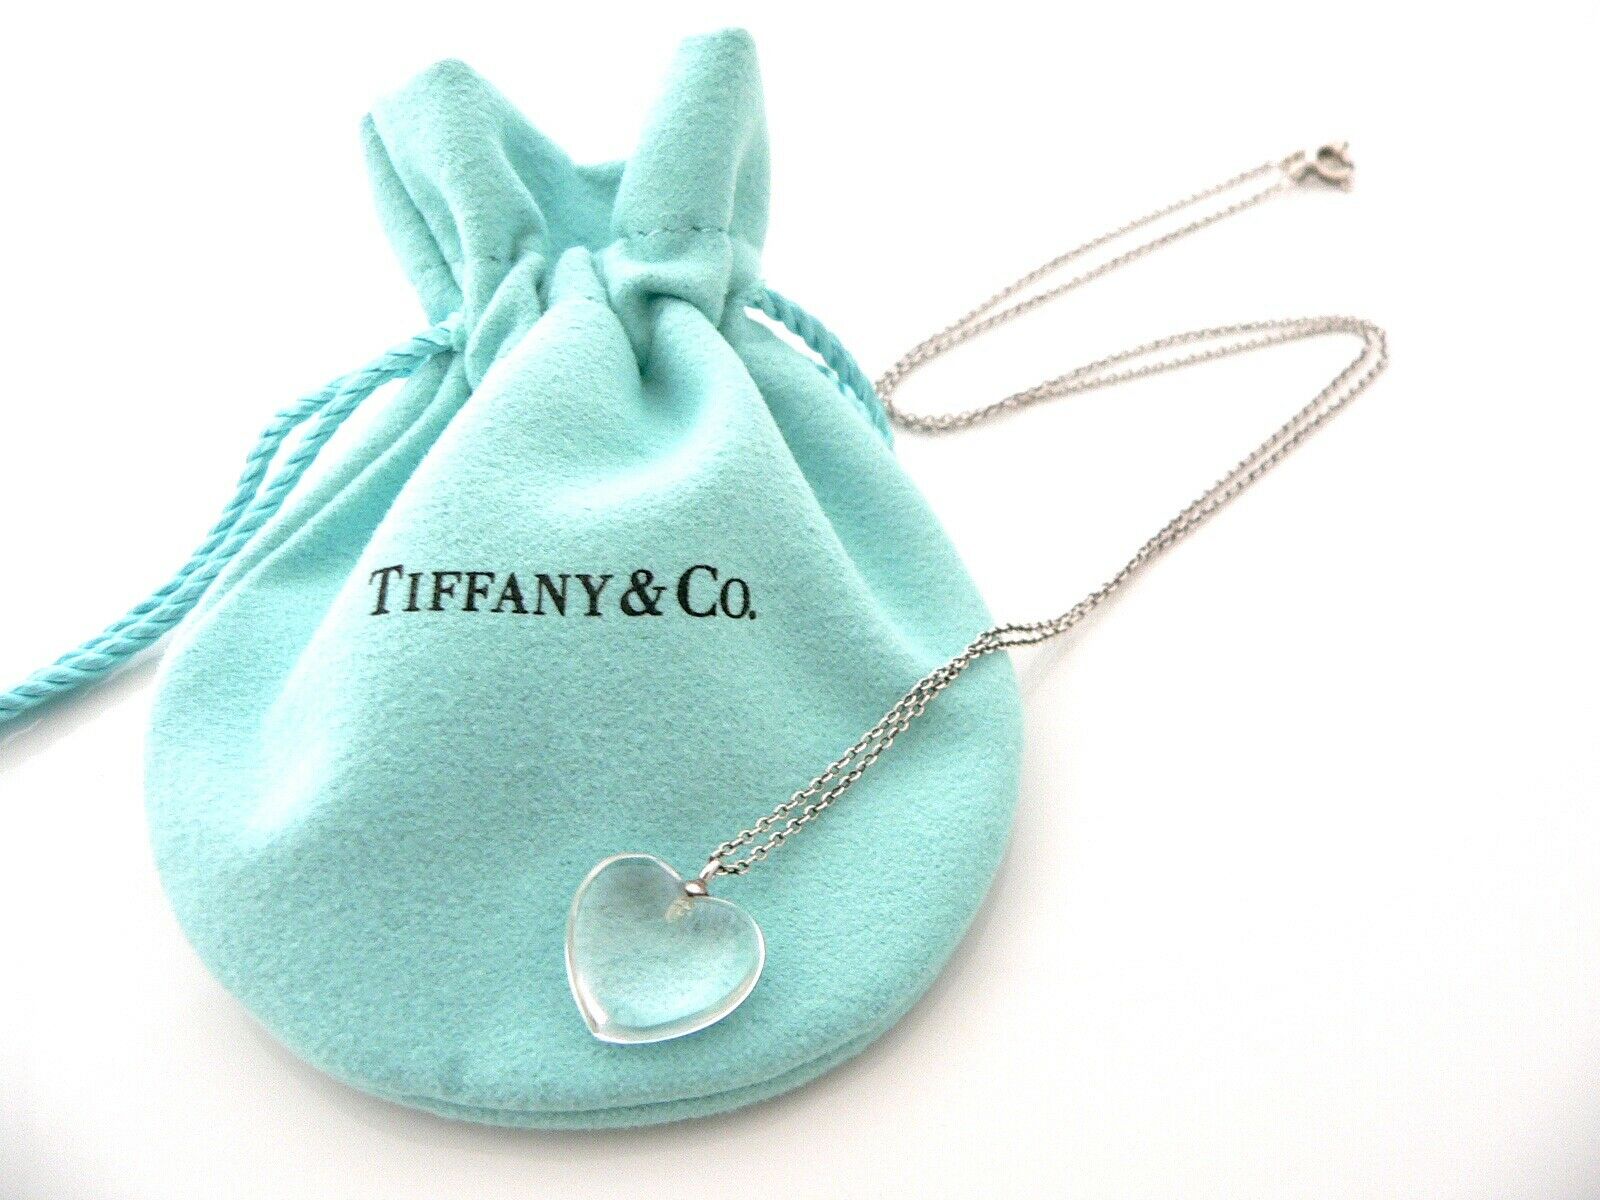 Tiffany & Co Sterling Silver Heart Tag Pendant Necklace – QUEEN MAY